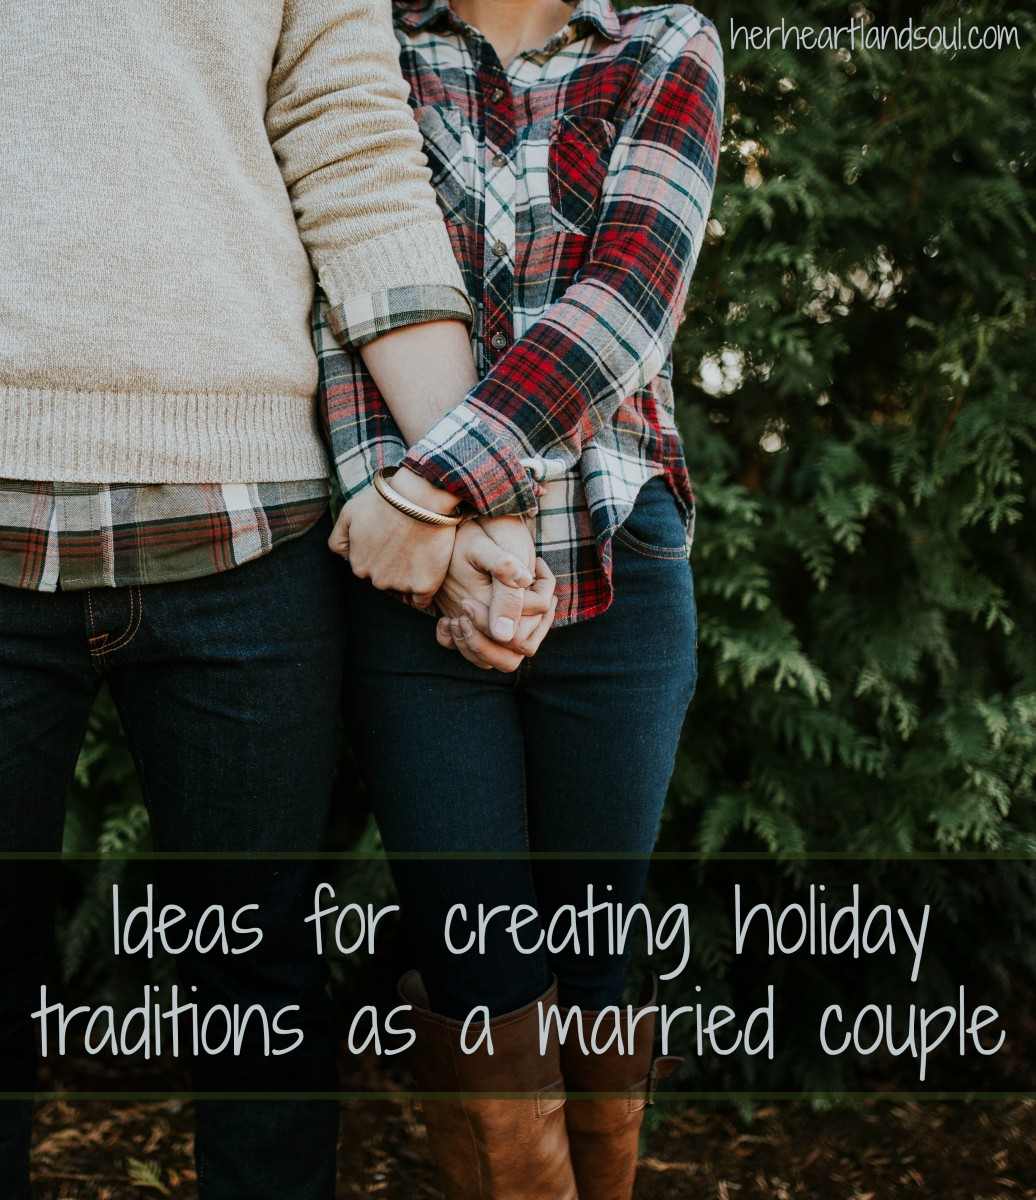 ideas for creating holiday traditions as a married couple her heartland soul